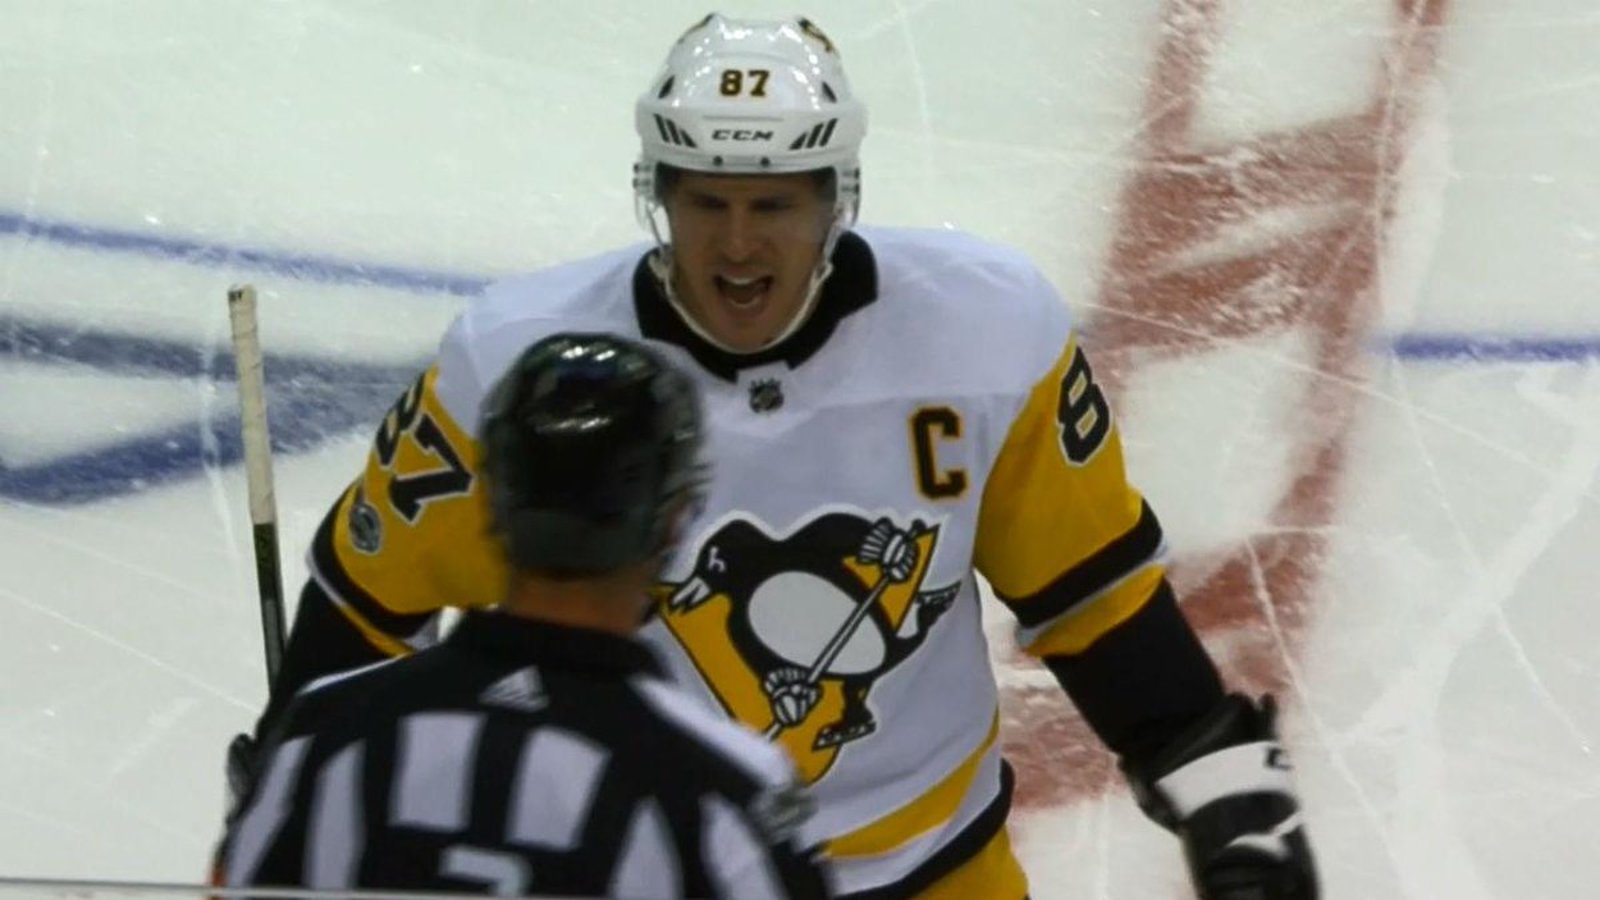 Must See: Crosby gets a 10 min misconduct for abuse of an official!